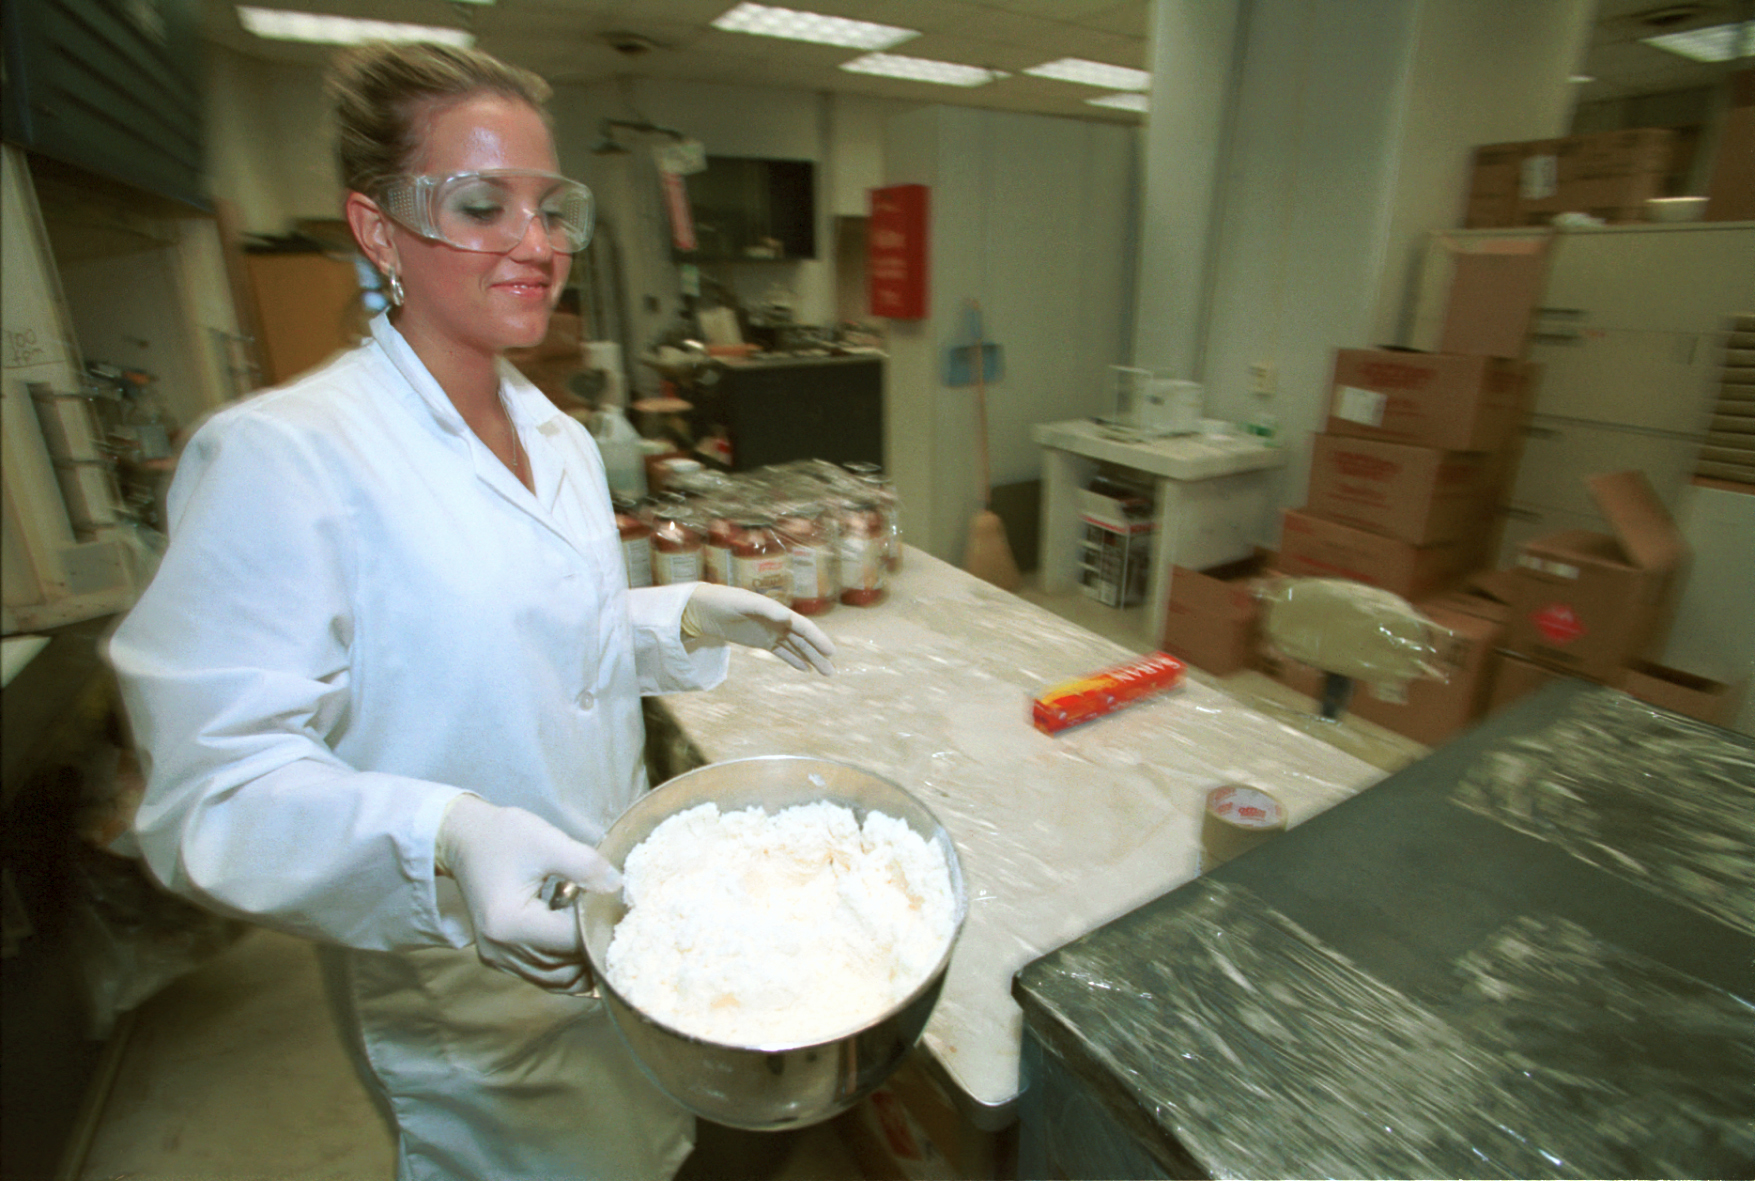 A CBP lab technician makes pseudo drugs intended to assist canine officers train their dogs.